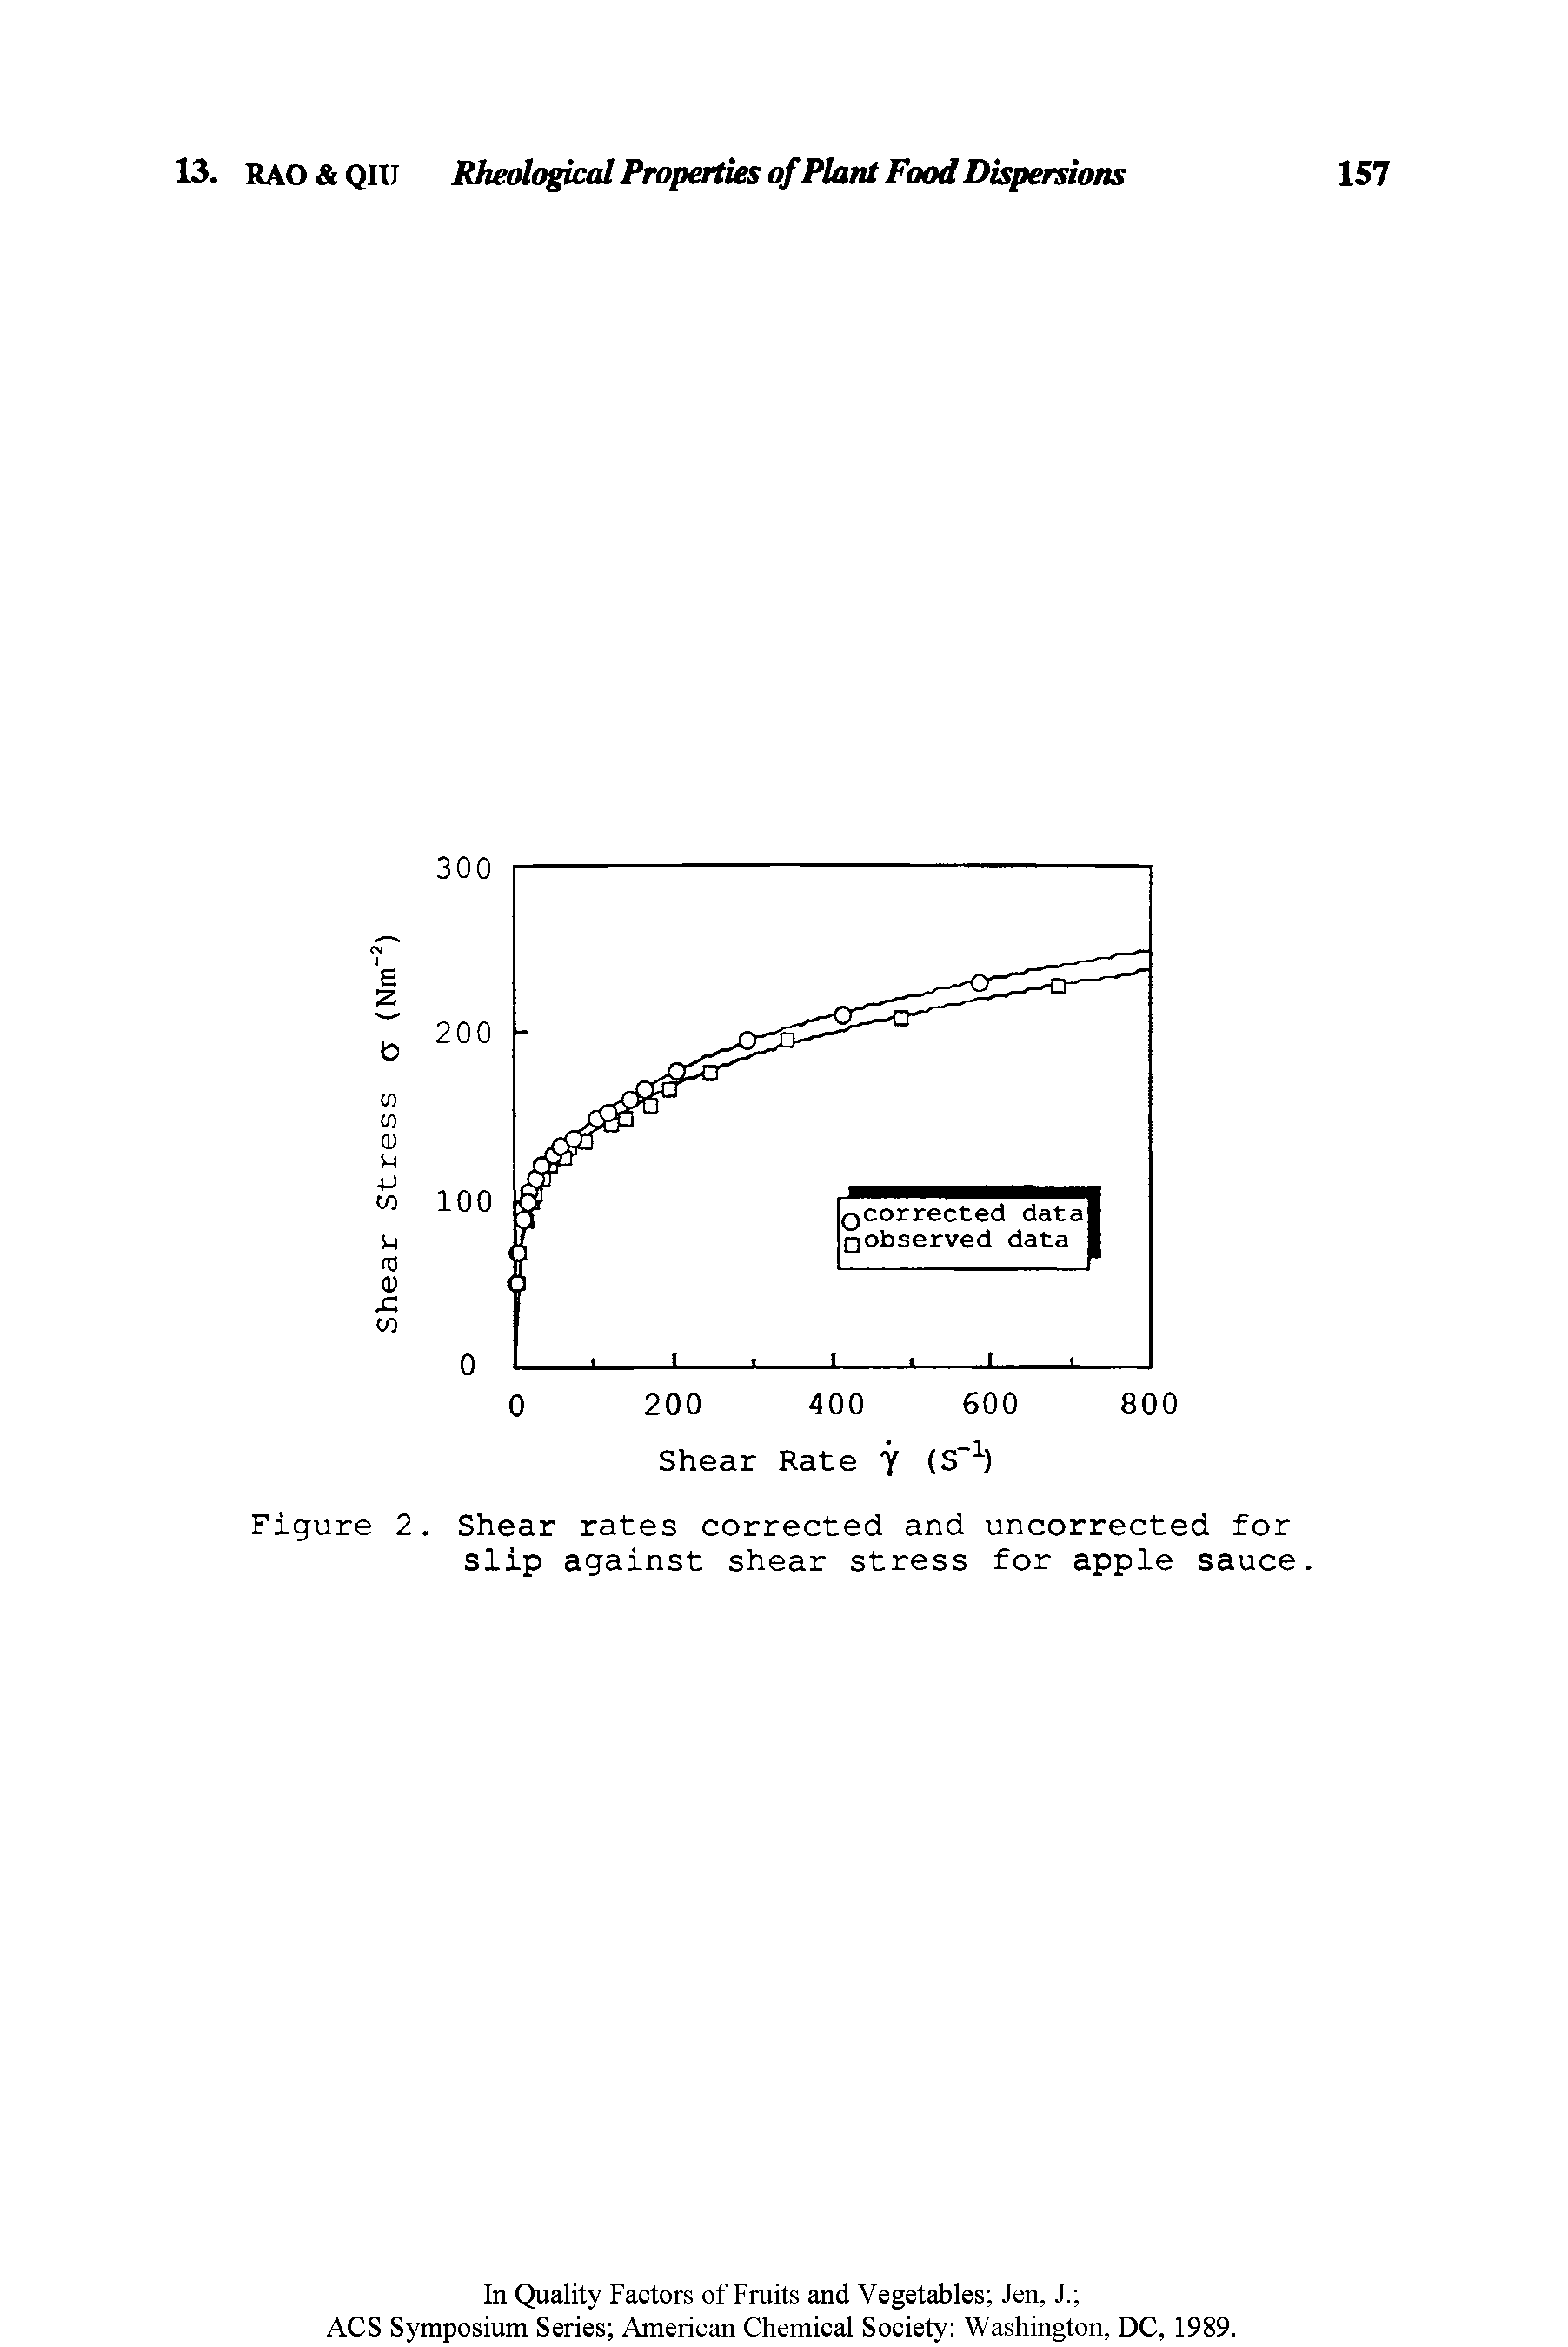 Figure 2. Shear rates corrected and uncorrected for slip against shear stress for apple sauce.